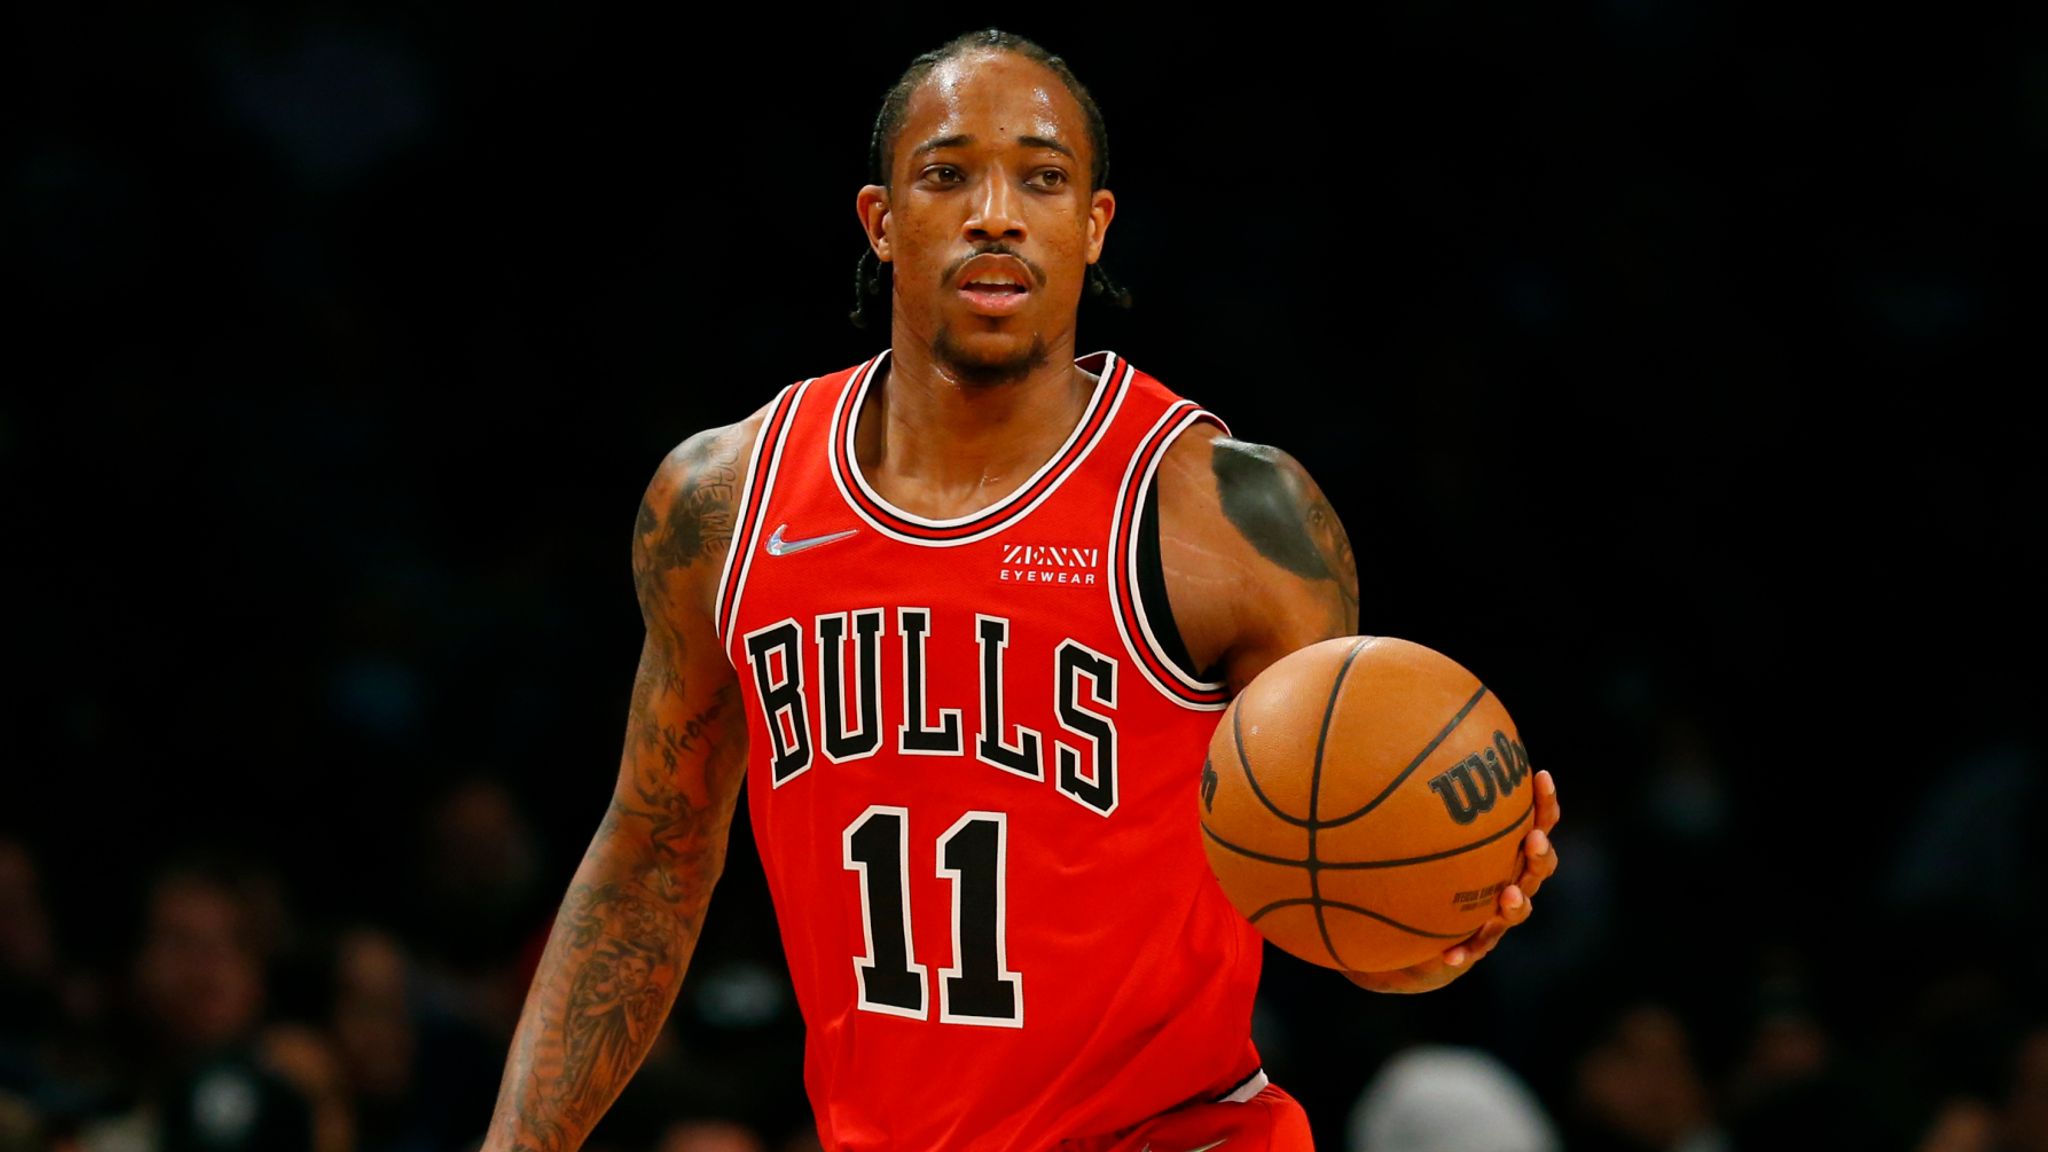 Chicago Bulls are leading the Eastern Conference behind DeMar